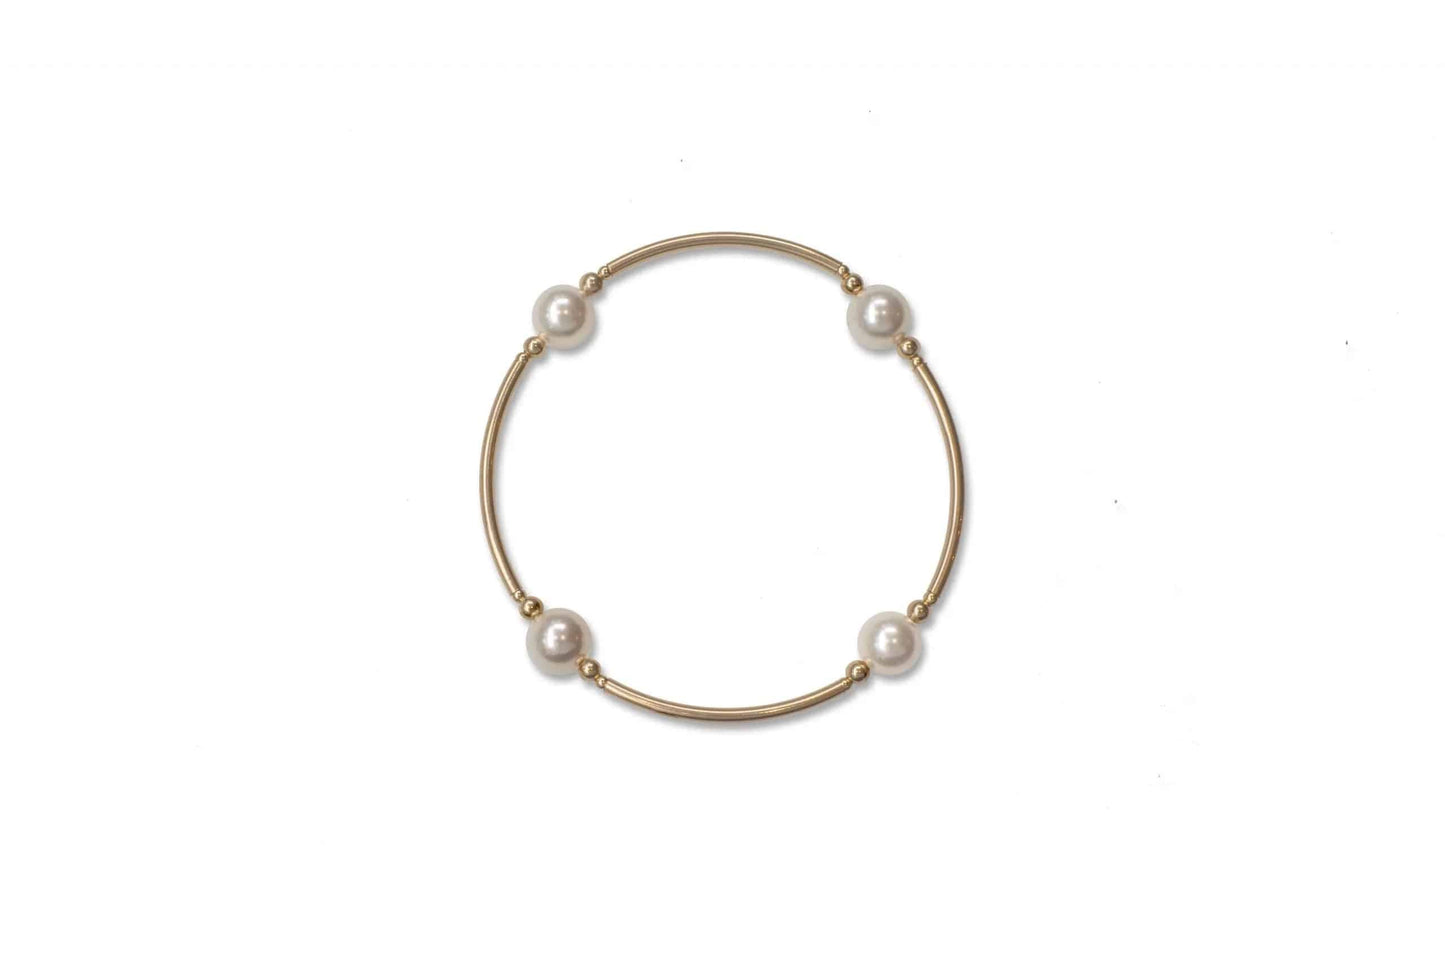 8MM WHITE PEARL BLESSING BRACELET WITH GOLD-FILLED LINKS - Findlay Rowe Designs